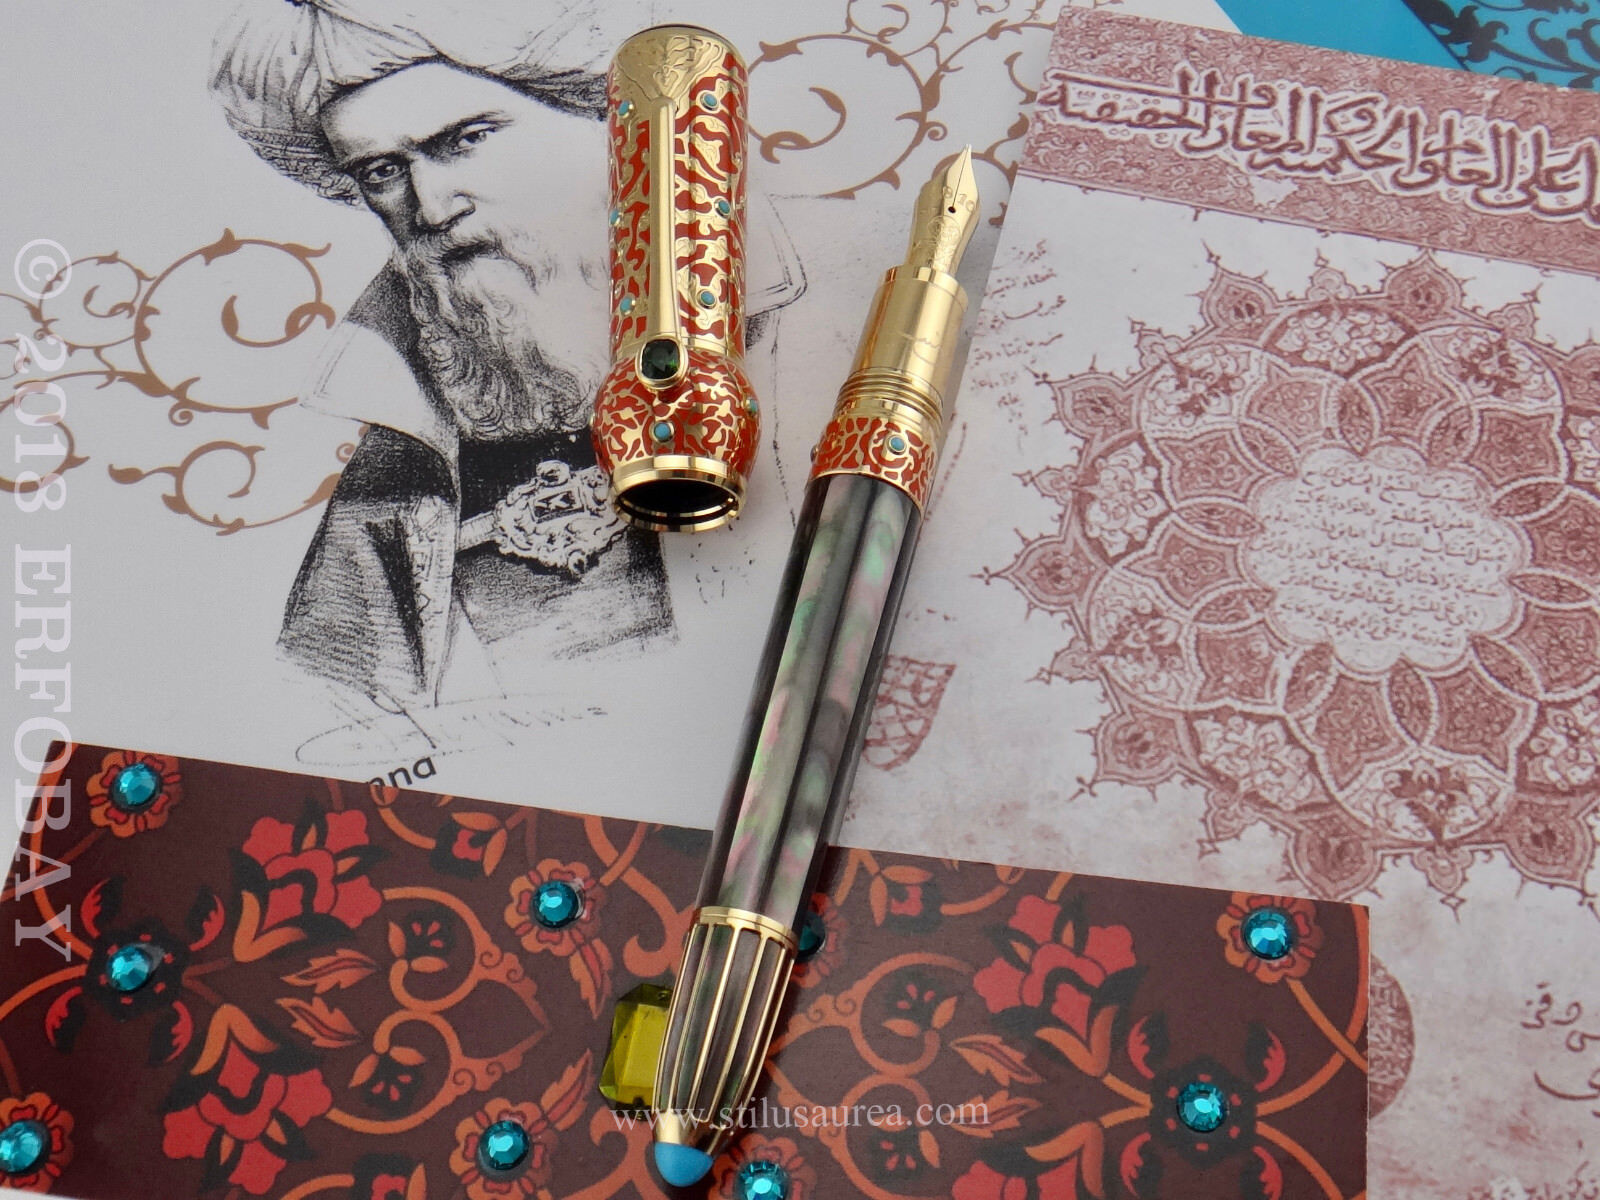 MONTBLANC 2018 Homage to Ibn Sīnā (Avicenna) Limited Edition 65 Fountain Pen M